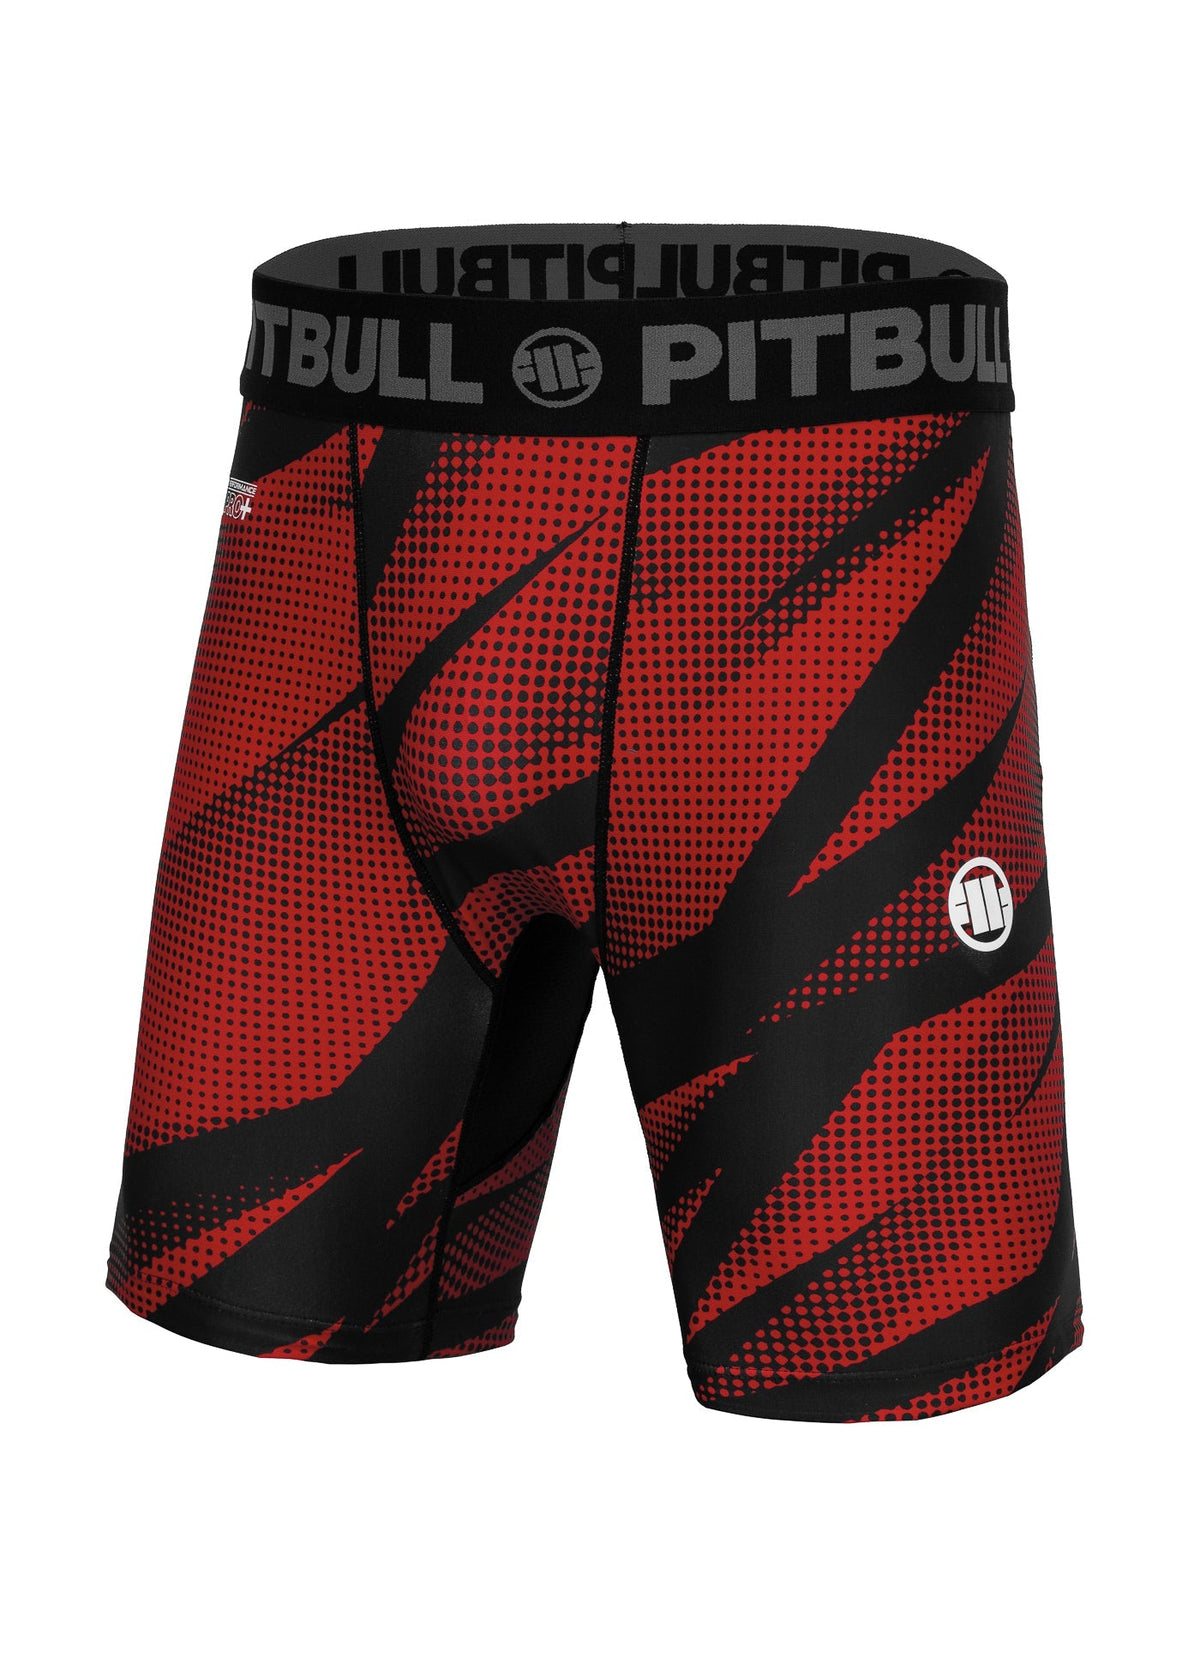 DOT CAMO 2 Red Compression Shorts.